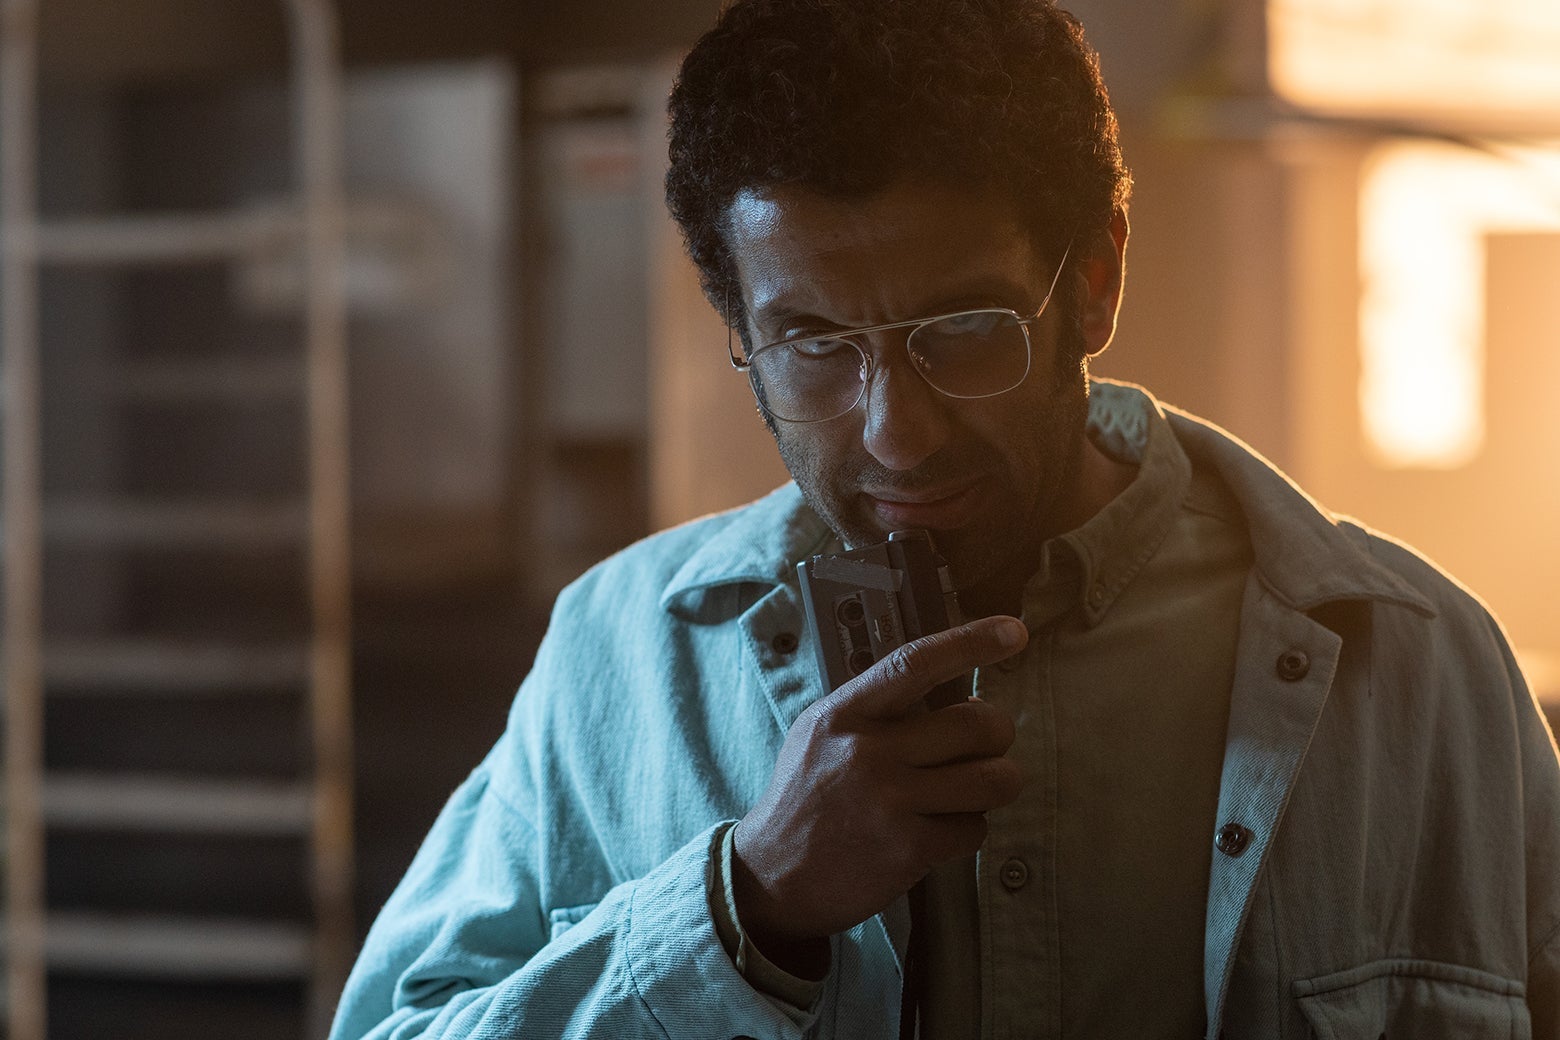 Actor Adeel Akhtar as Dr. Singh in a still from Sweet Tooth, wearing a denim shirt and speaking into a microcassete recorder.